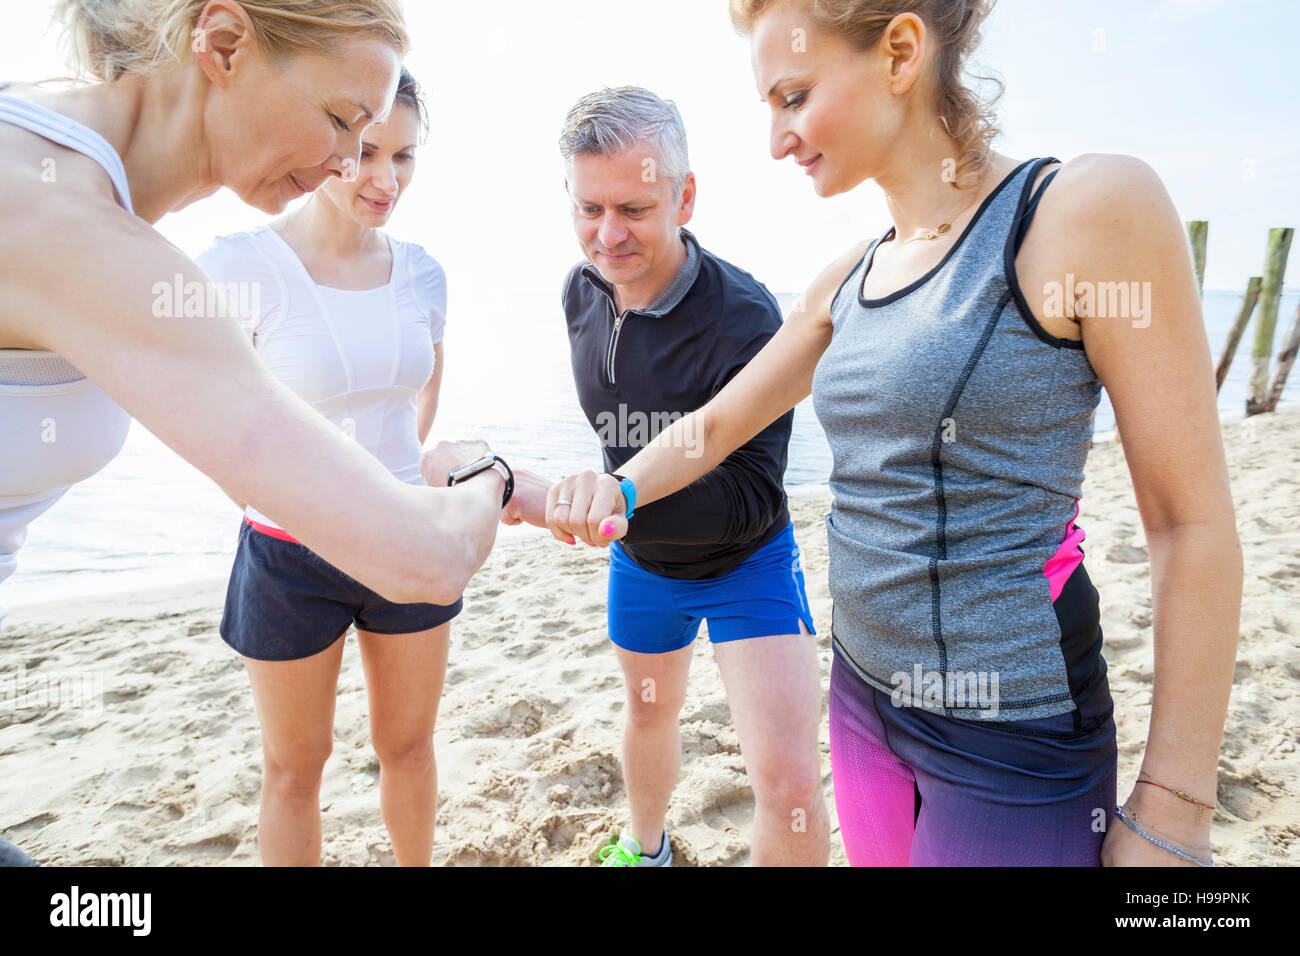 Group of friends checking their running watches Stock Photo